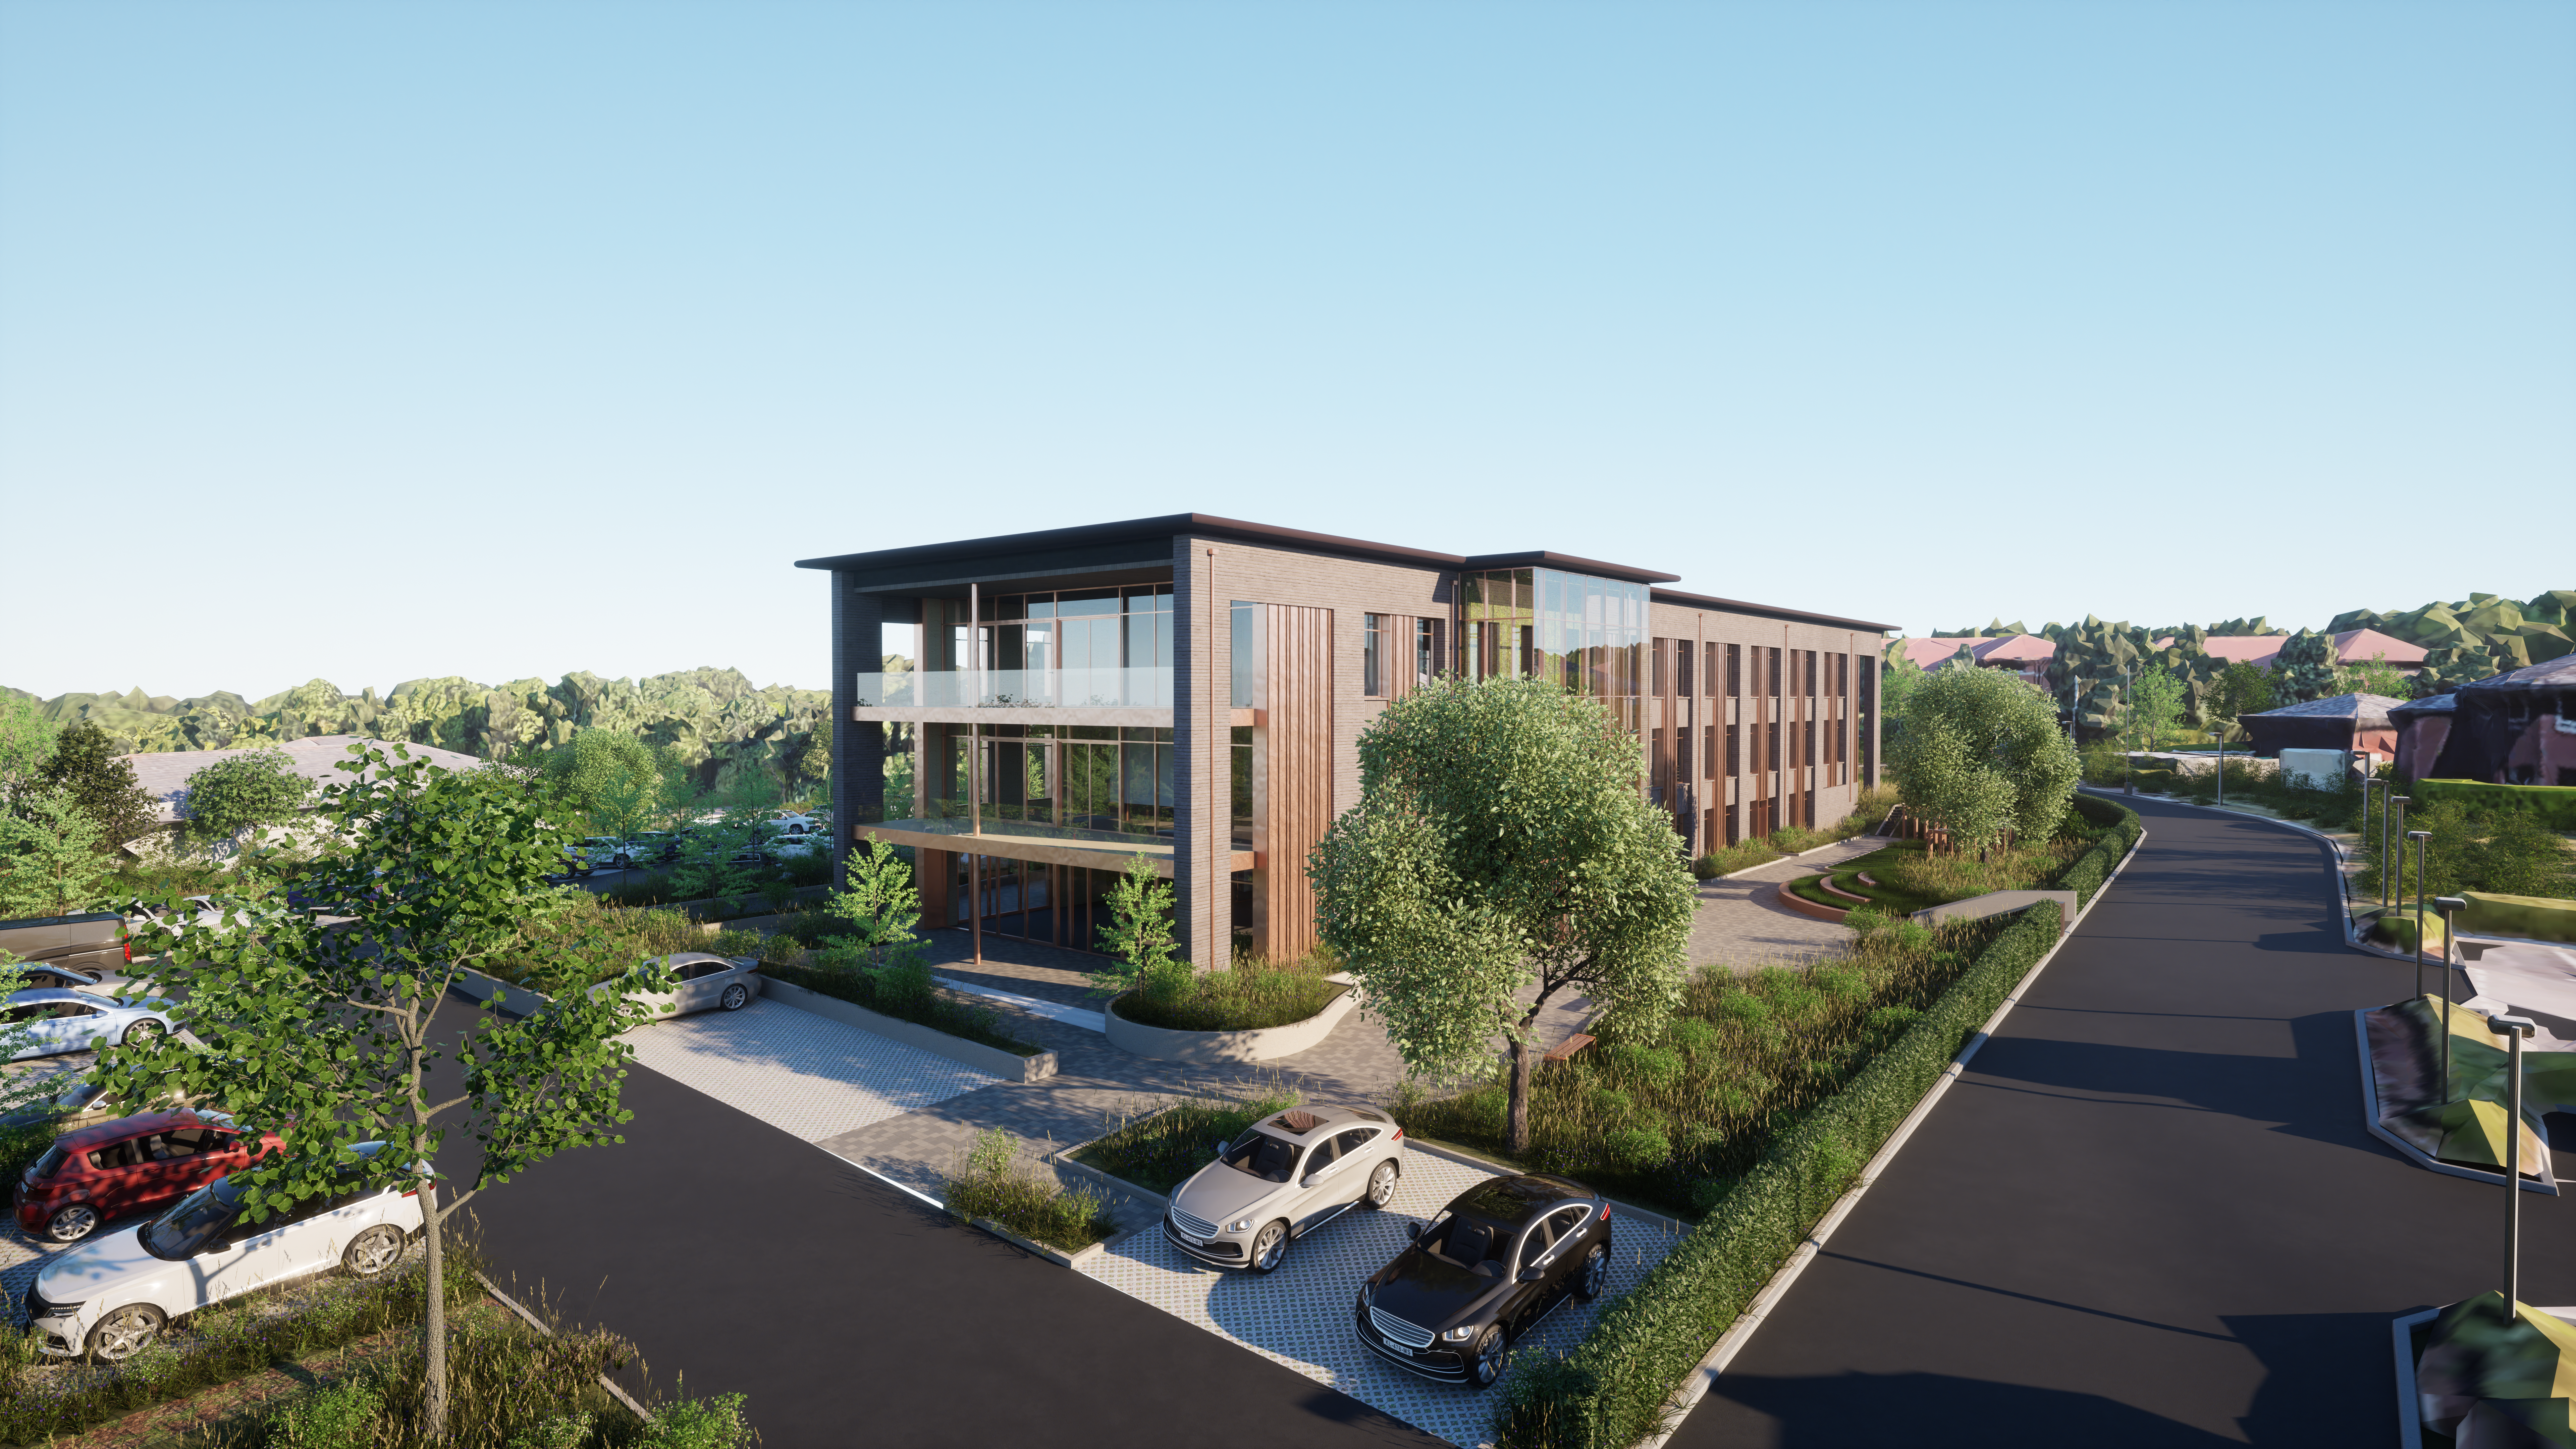 Planning Application submitted for new build “best in class” offices in Exeter